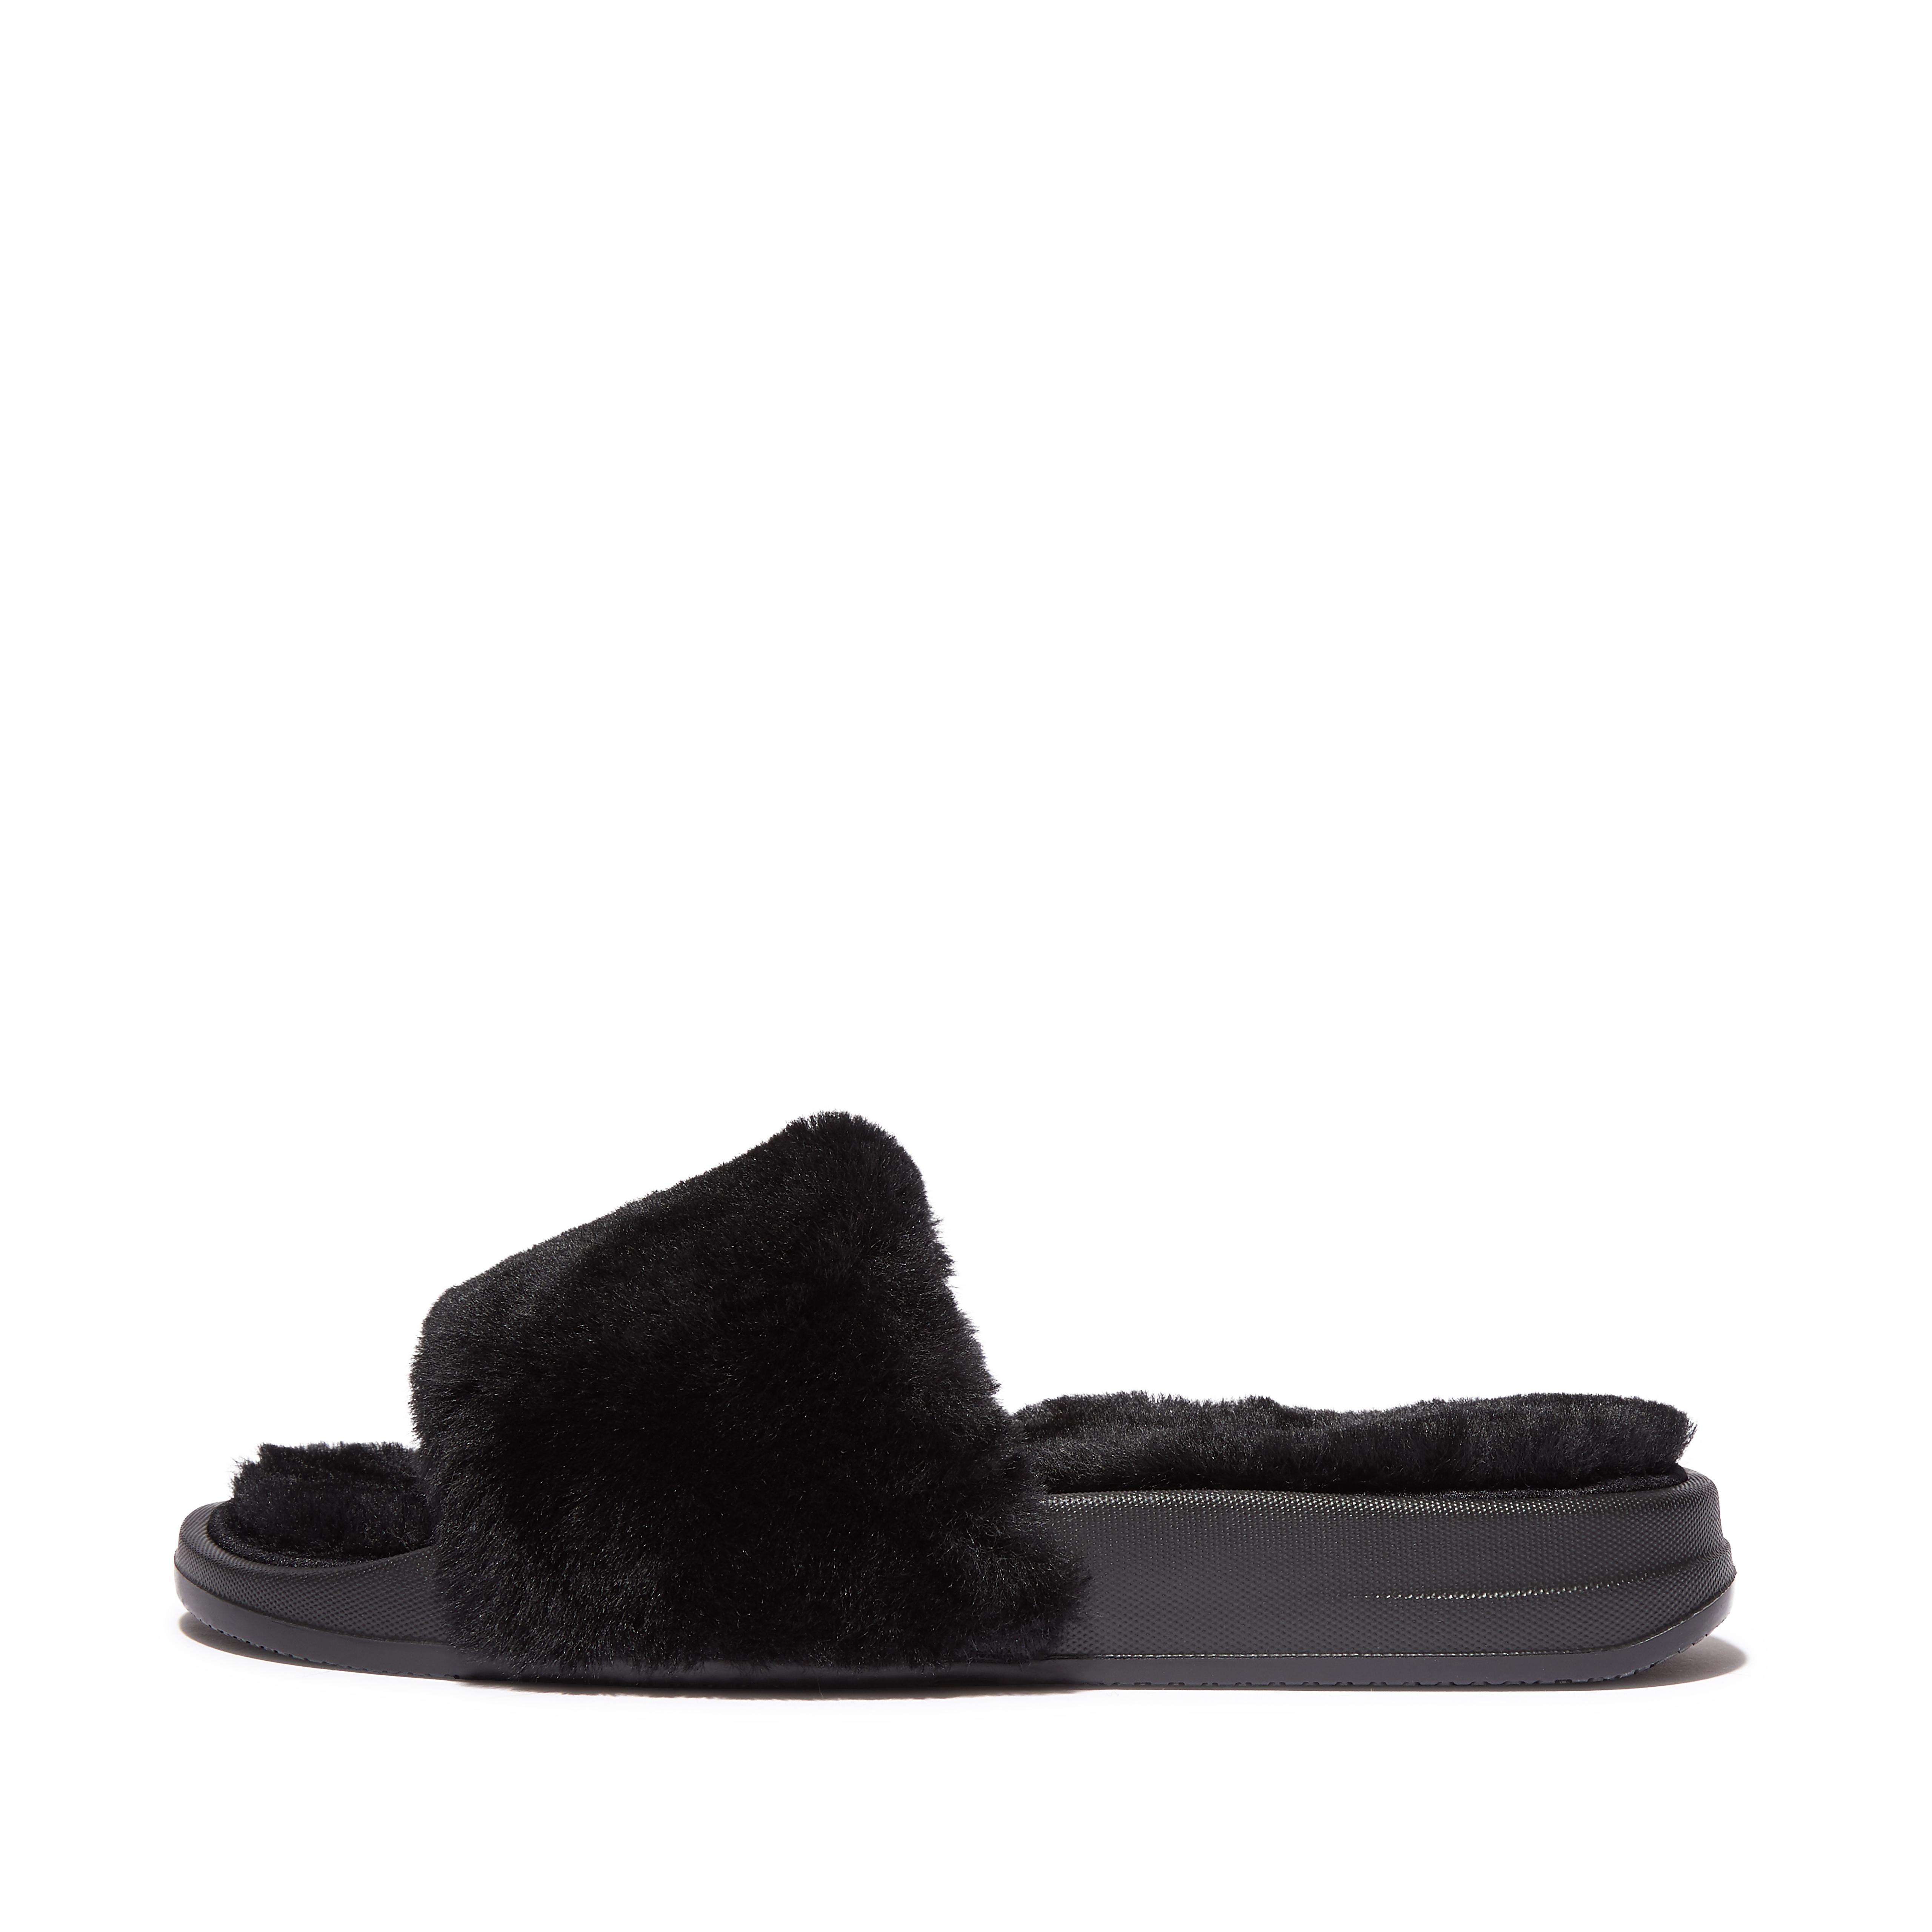 Women's iQushion Shearling Slides | FitFlop US